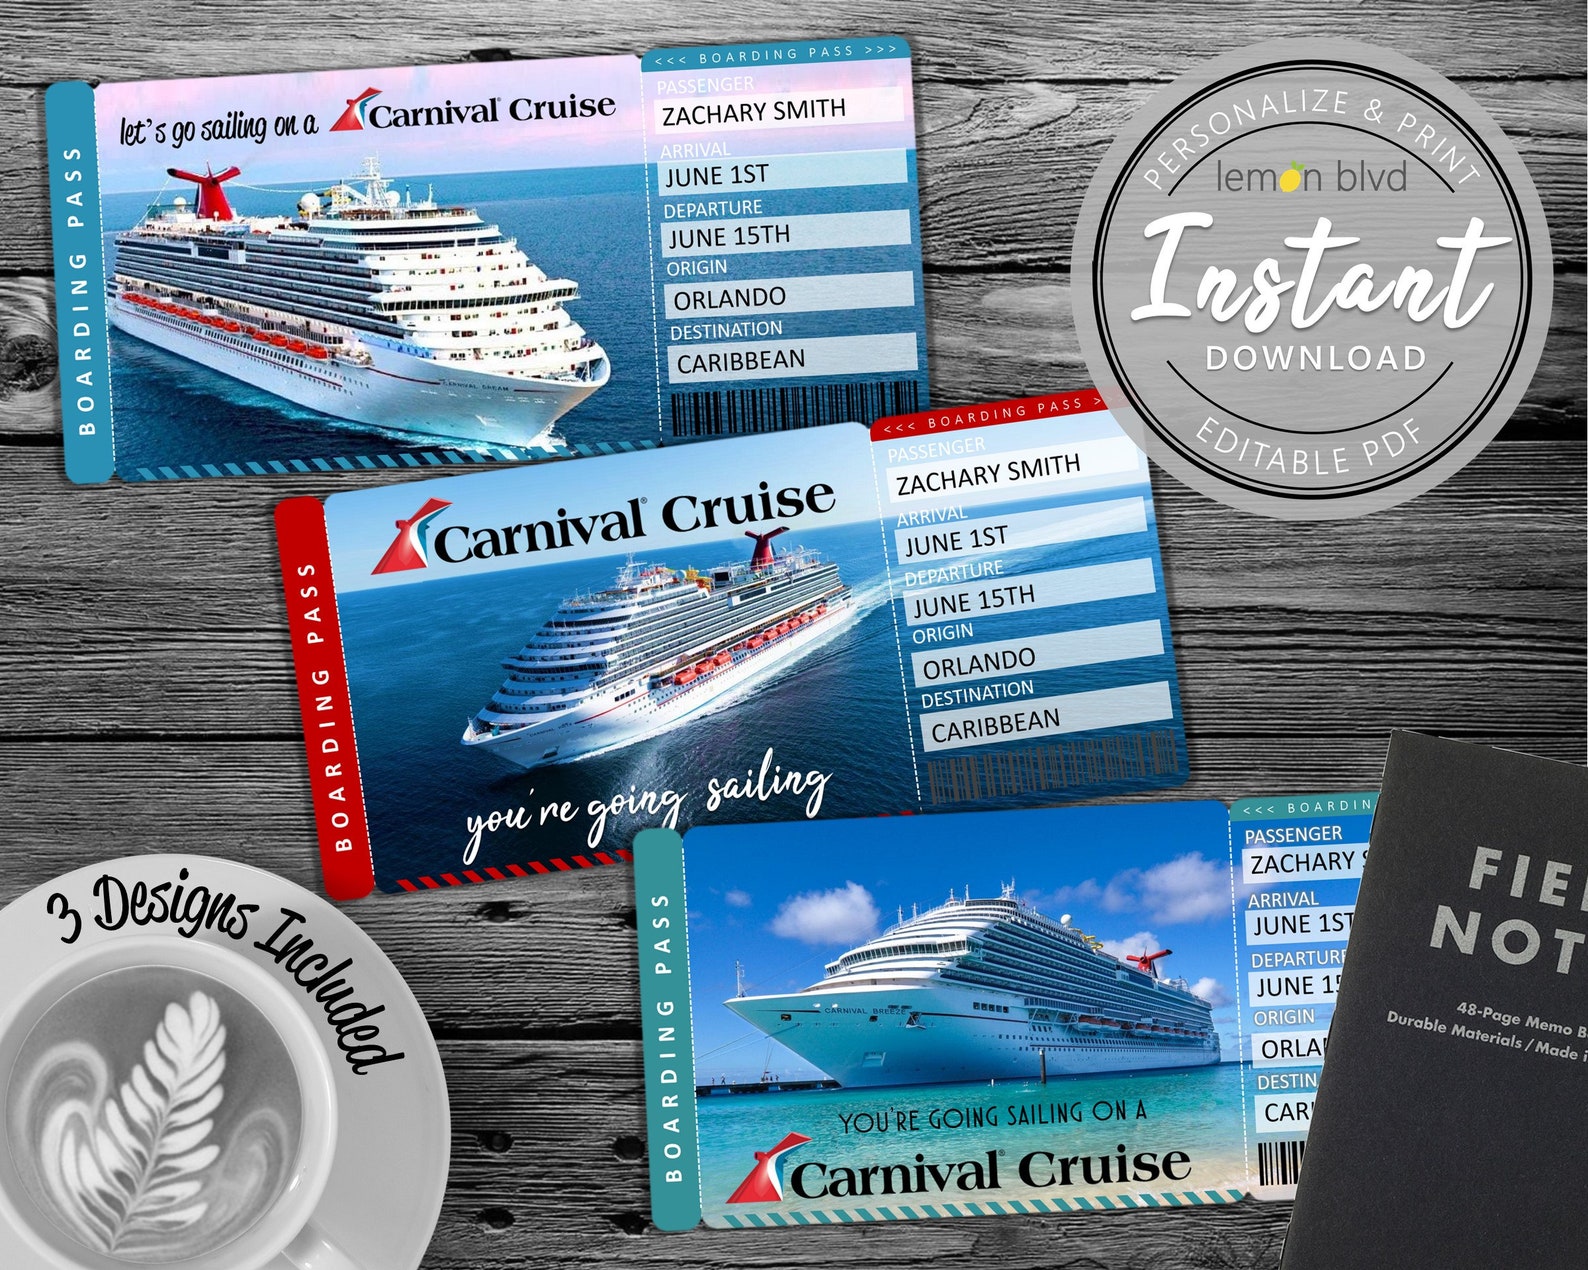 cruise tickets on sale